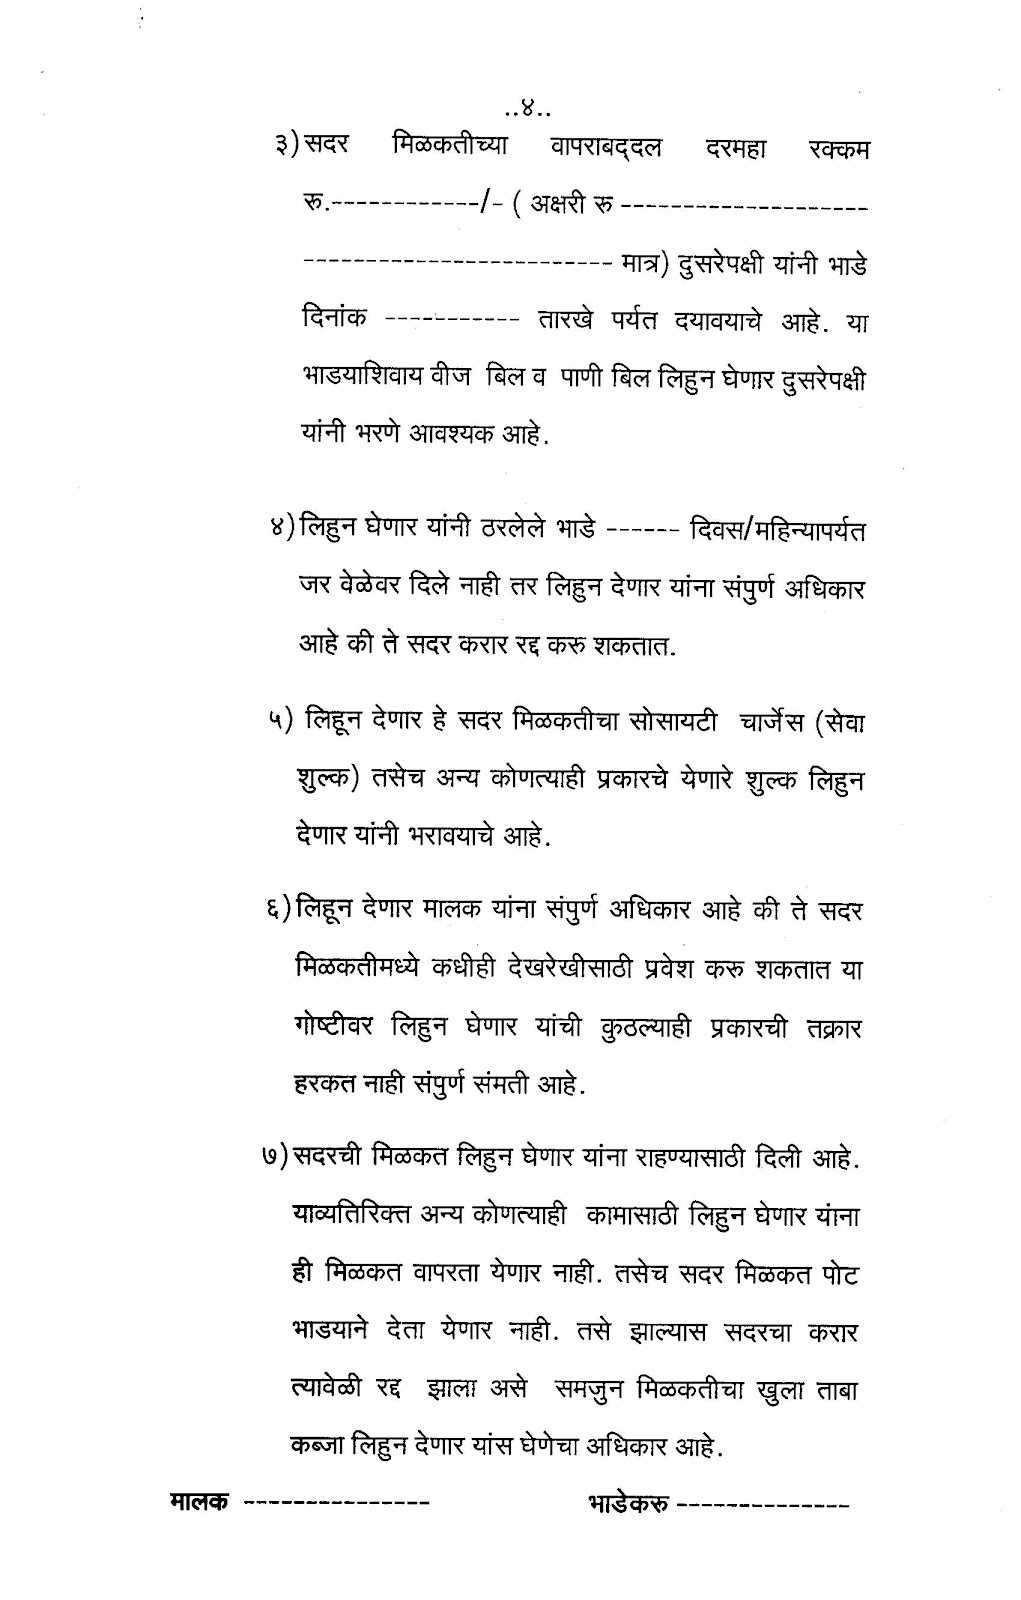 Rent agreement format in hindi